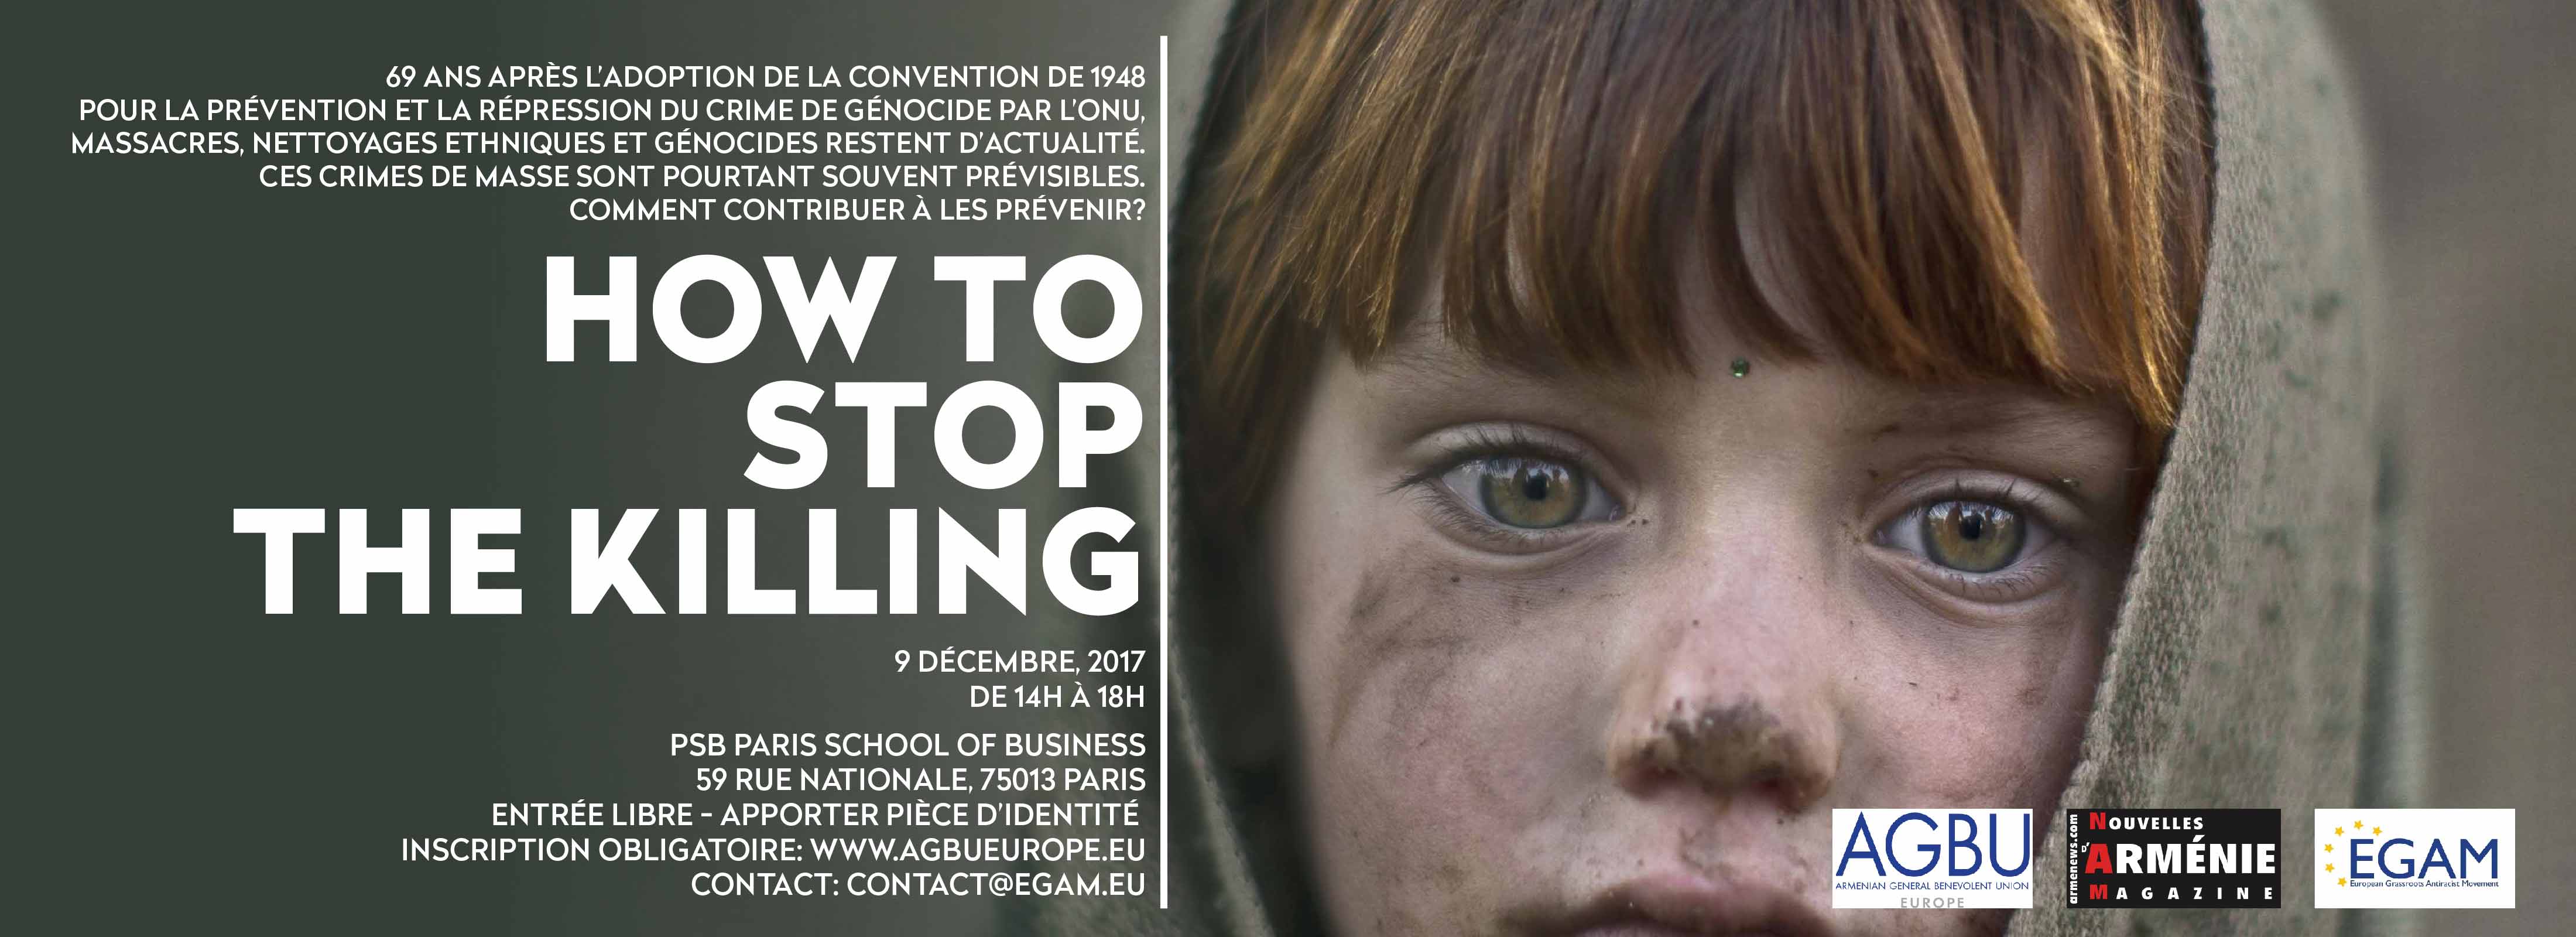 How to Stop the Killing – Conference in Paris, France